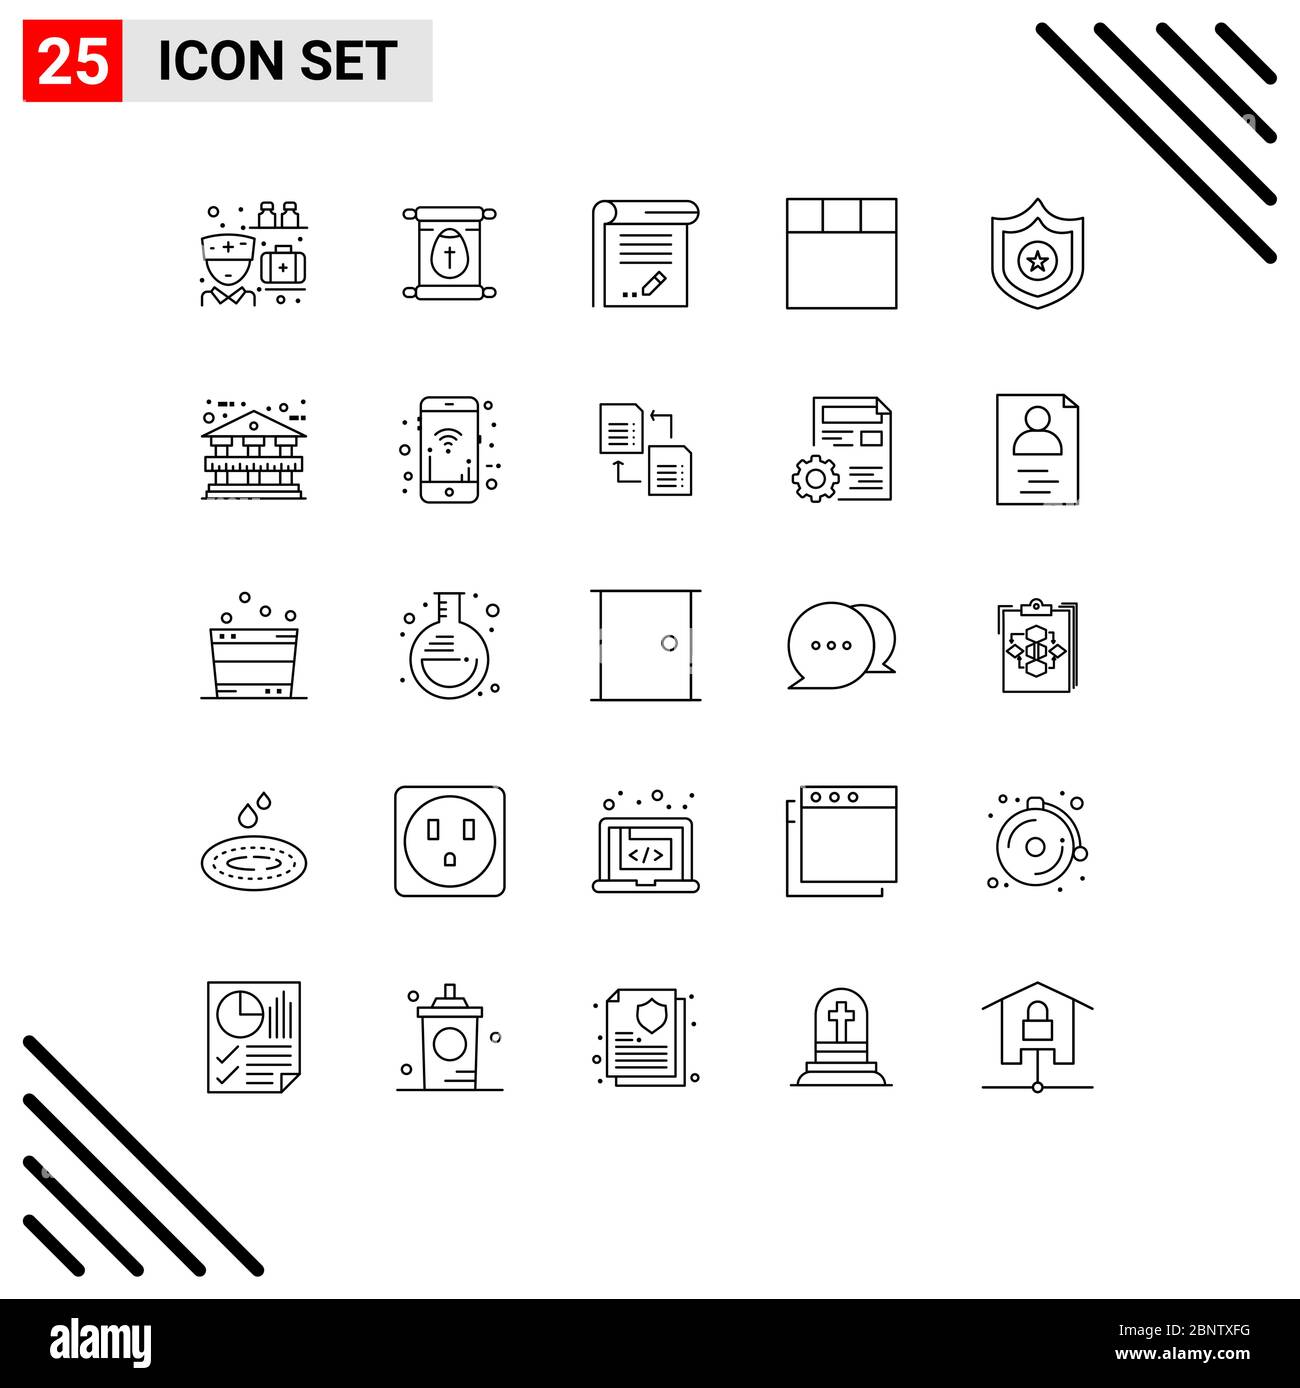 Group of 25 Lines Signs and Symbols for shield, police, document, layout, notebook Editable Vector Design Elements Stock Vector